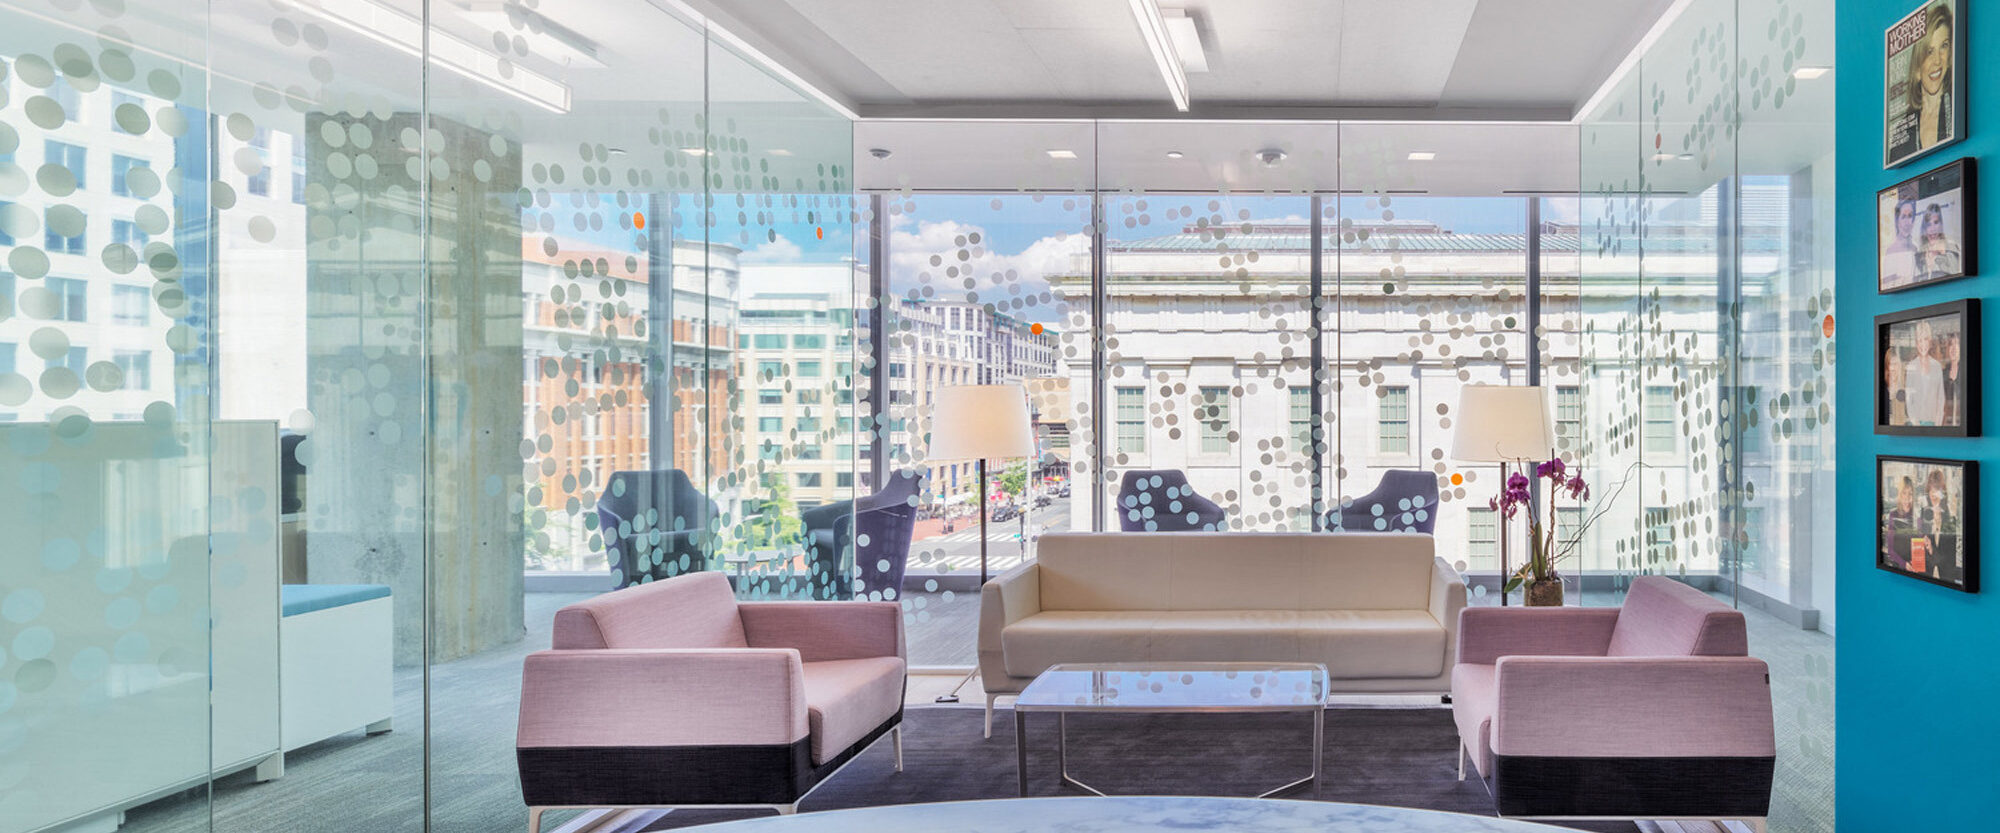 Modern office reception area with floor-to-ceiling windows providing natural light, two blush armchairs, a beige sofa atop a marble rug, and a frosted glass room divider with circular patterns. Art pieces adorn the adjacent wall, harmonizing with the city view beyond.